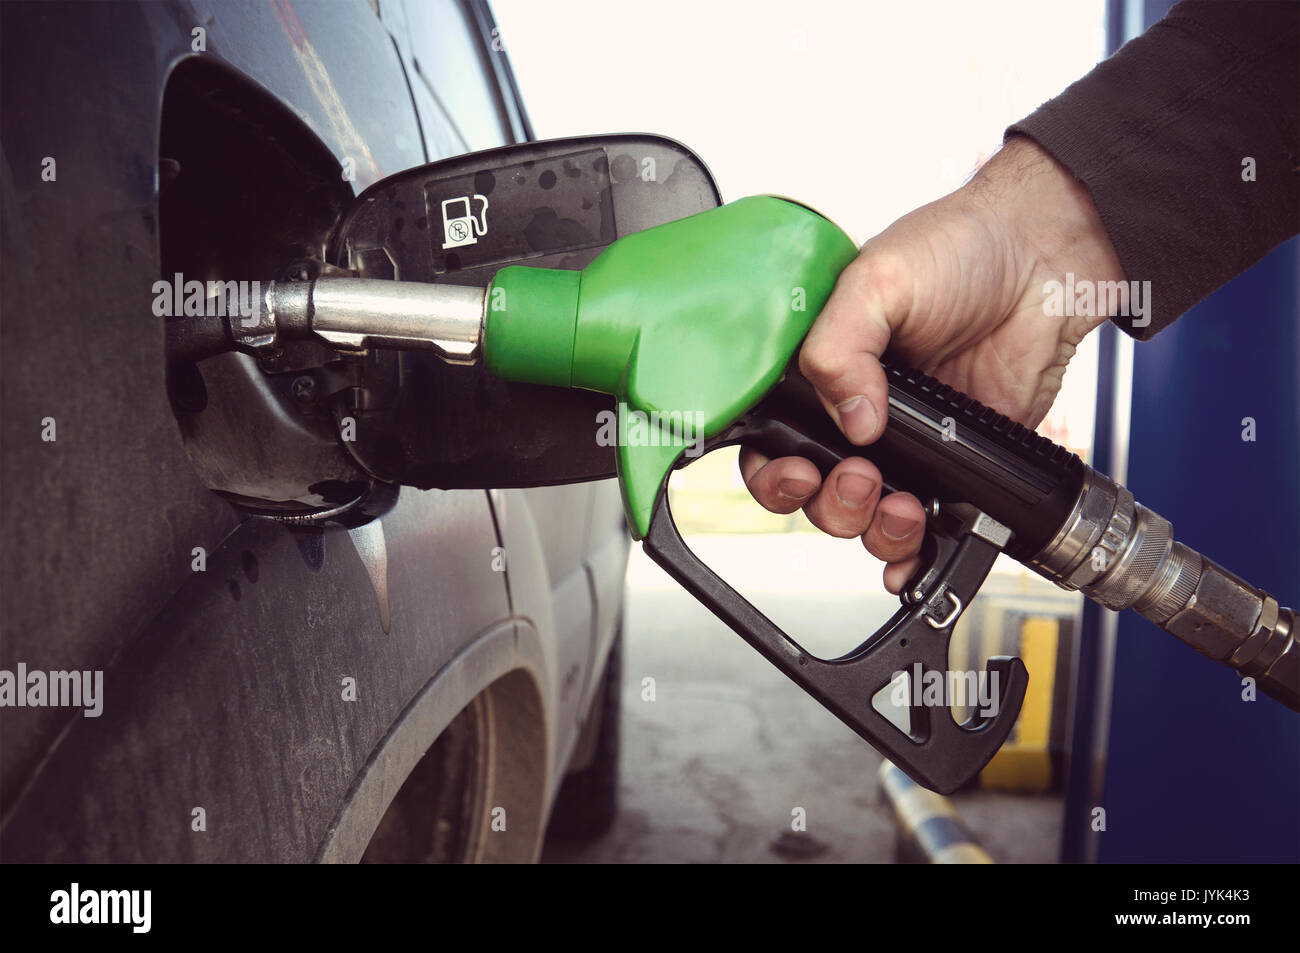 Fill up fuel at petrol station. Filling a dirty car at a gas station. Fuelling nozzle for refuelling a car in man's hand. Stock Photo